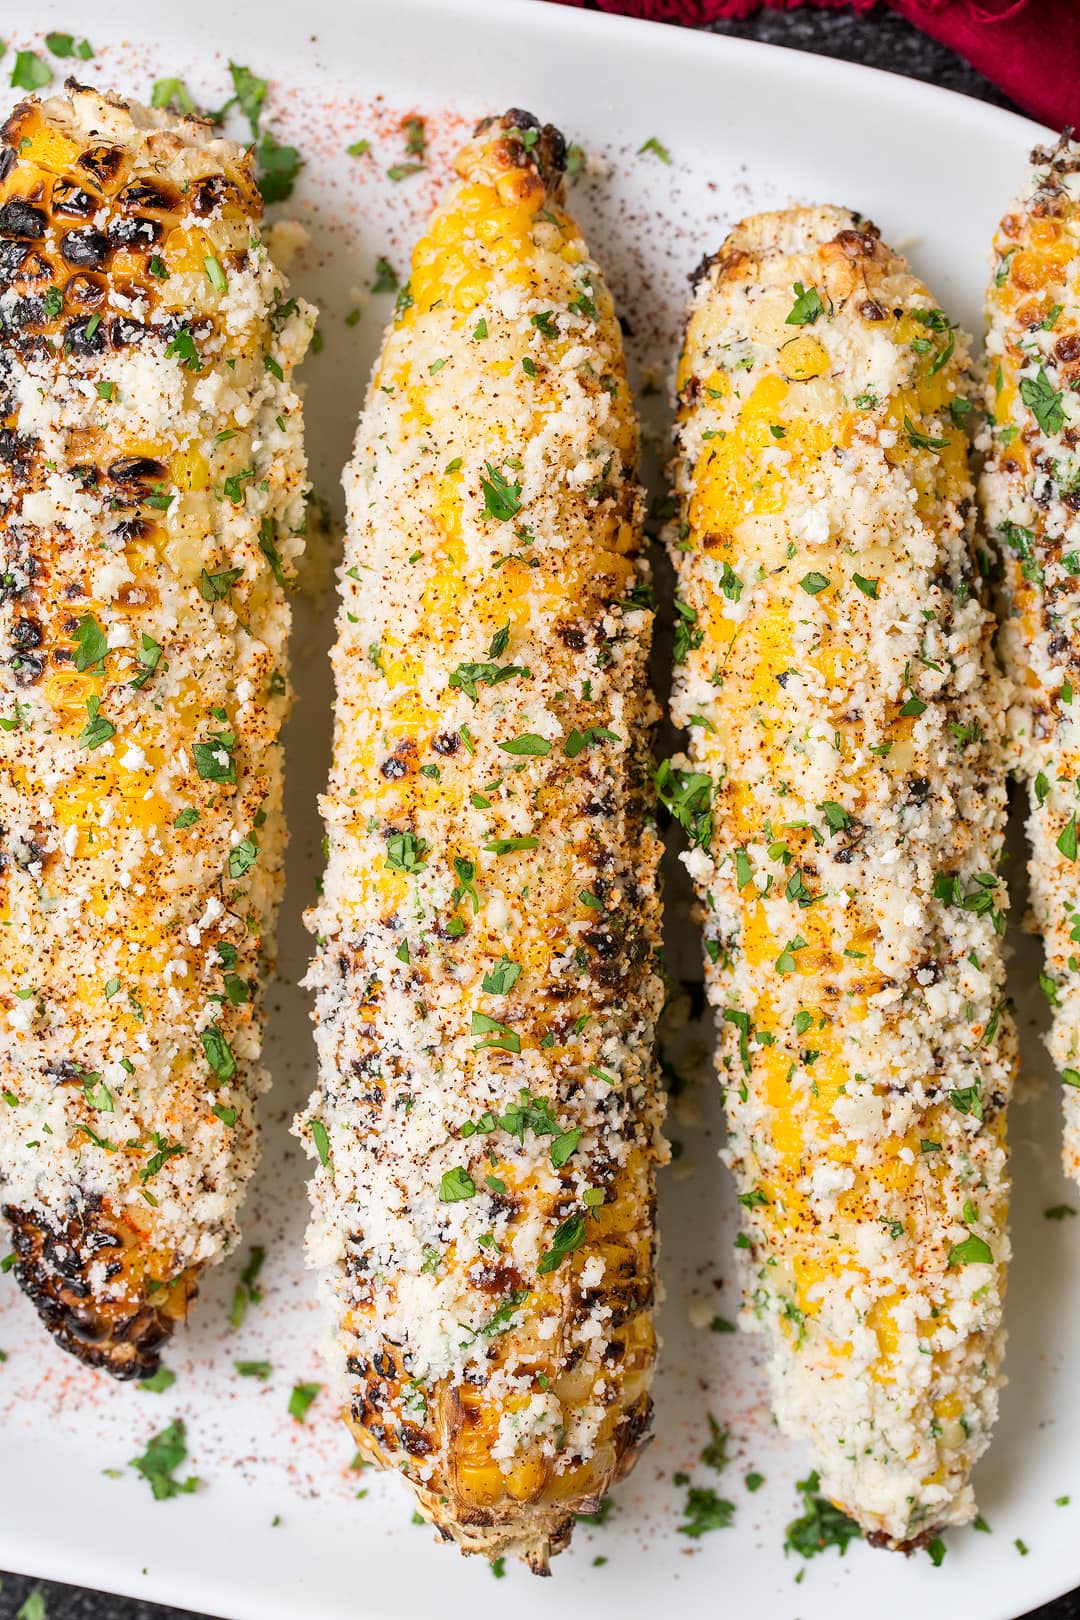 Mexican Street Corn close up image.